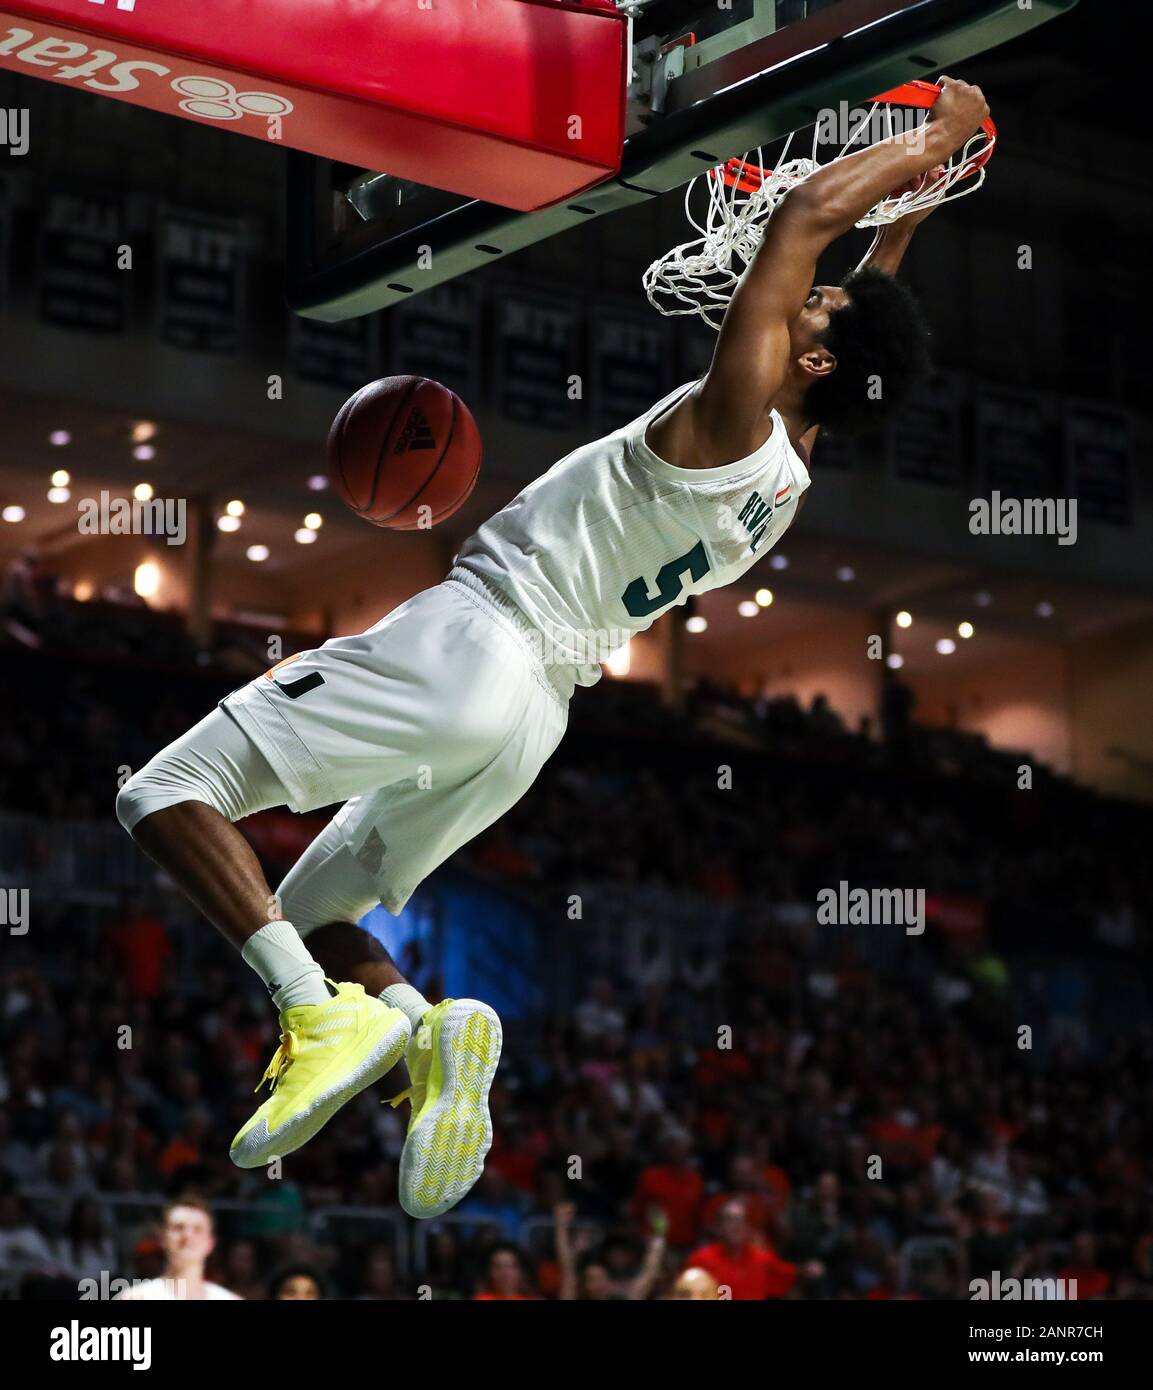 January 18, 2020: Miami Hurricanes guard Harlond Beverly (5) scores against the Florida State Seminoles during an NCAA men's basketball game at the Watsco Center in Coral Gables, Florida. Florida State won 83-79 in overtime. Mario Houben/CSM Stock Photo